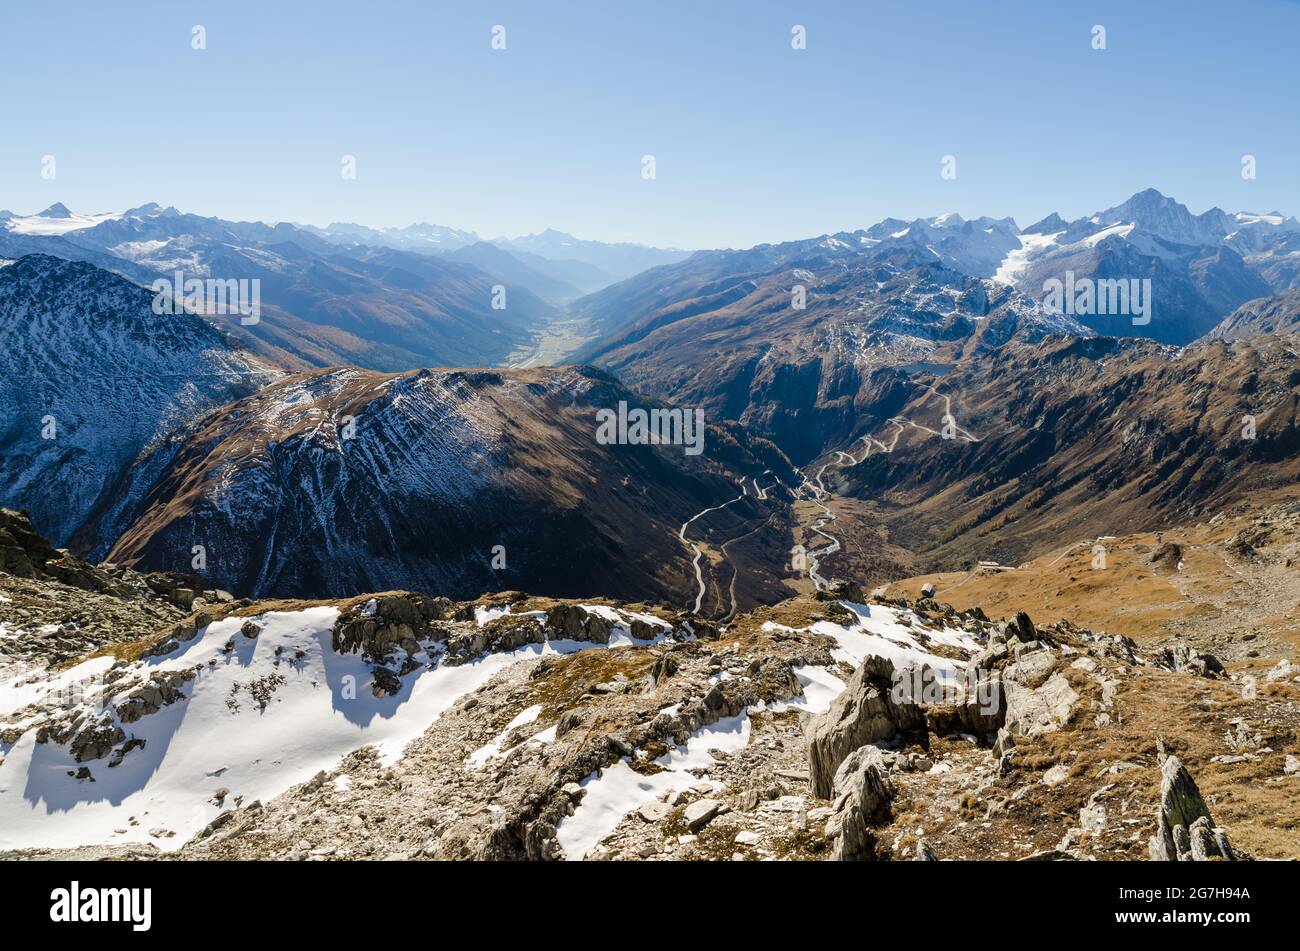 Alpine mountain landscape along the iconic Furkapass and Grimselpass road and the village Gletsch in the canton Wallis, Swiss Alps, Switzerland Stock Photo